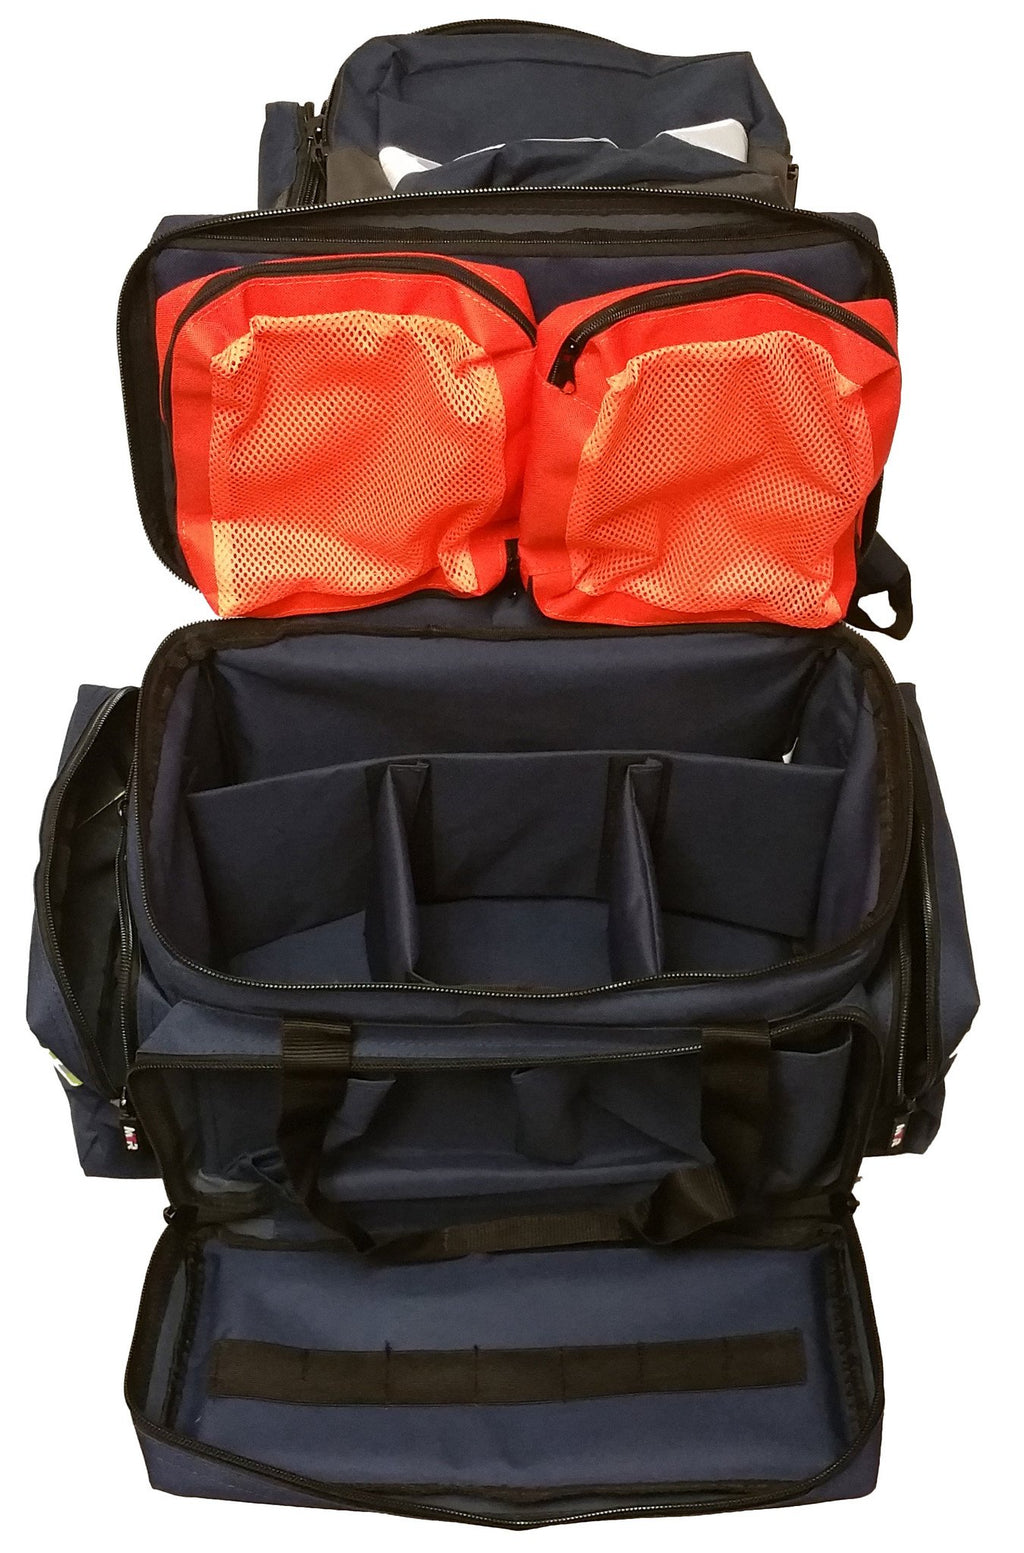 MTR Large Padded Trauma Bag - Impervious - mtrsuperstore